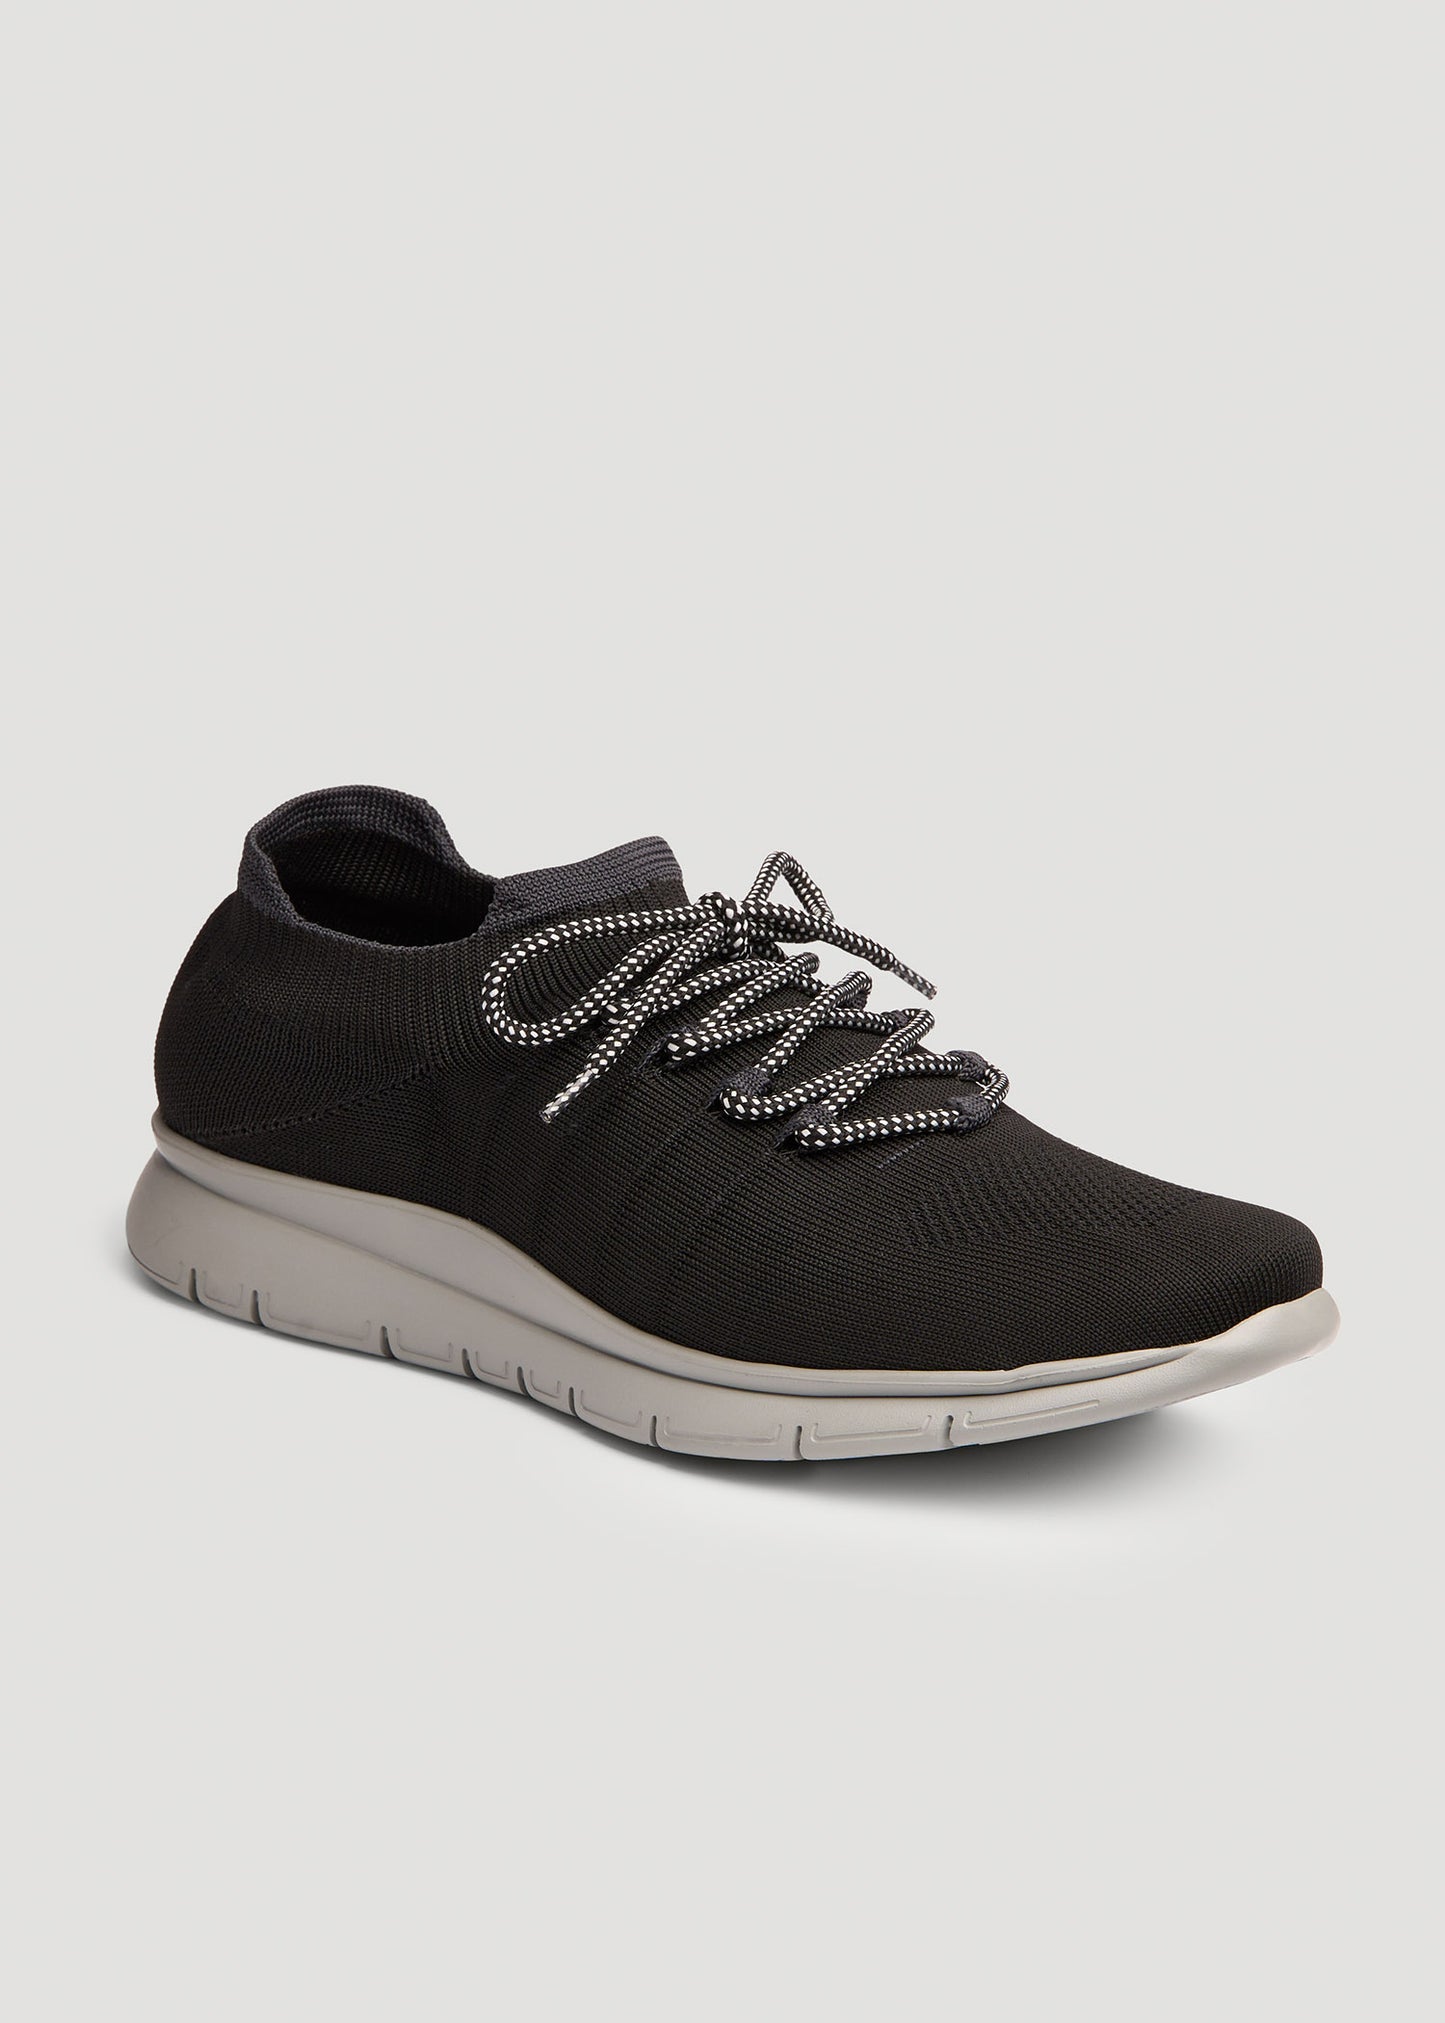 American-Tall-Men-Knit-Runners-Black-Front